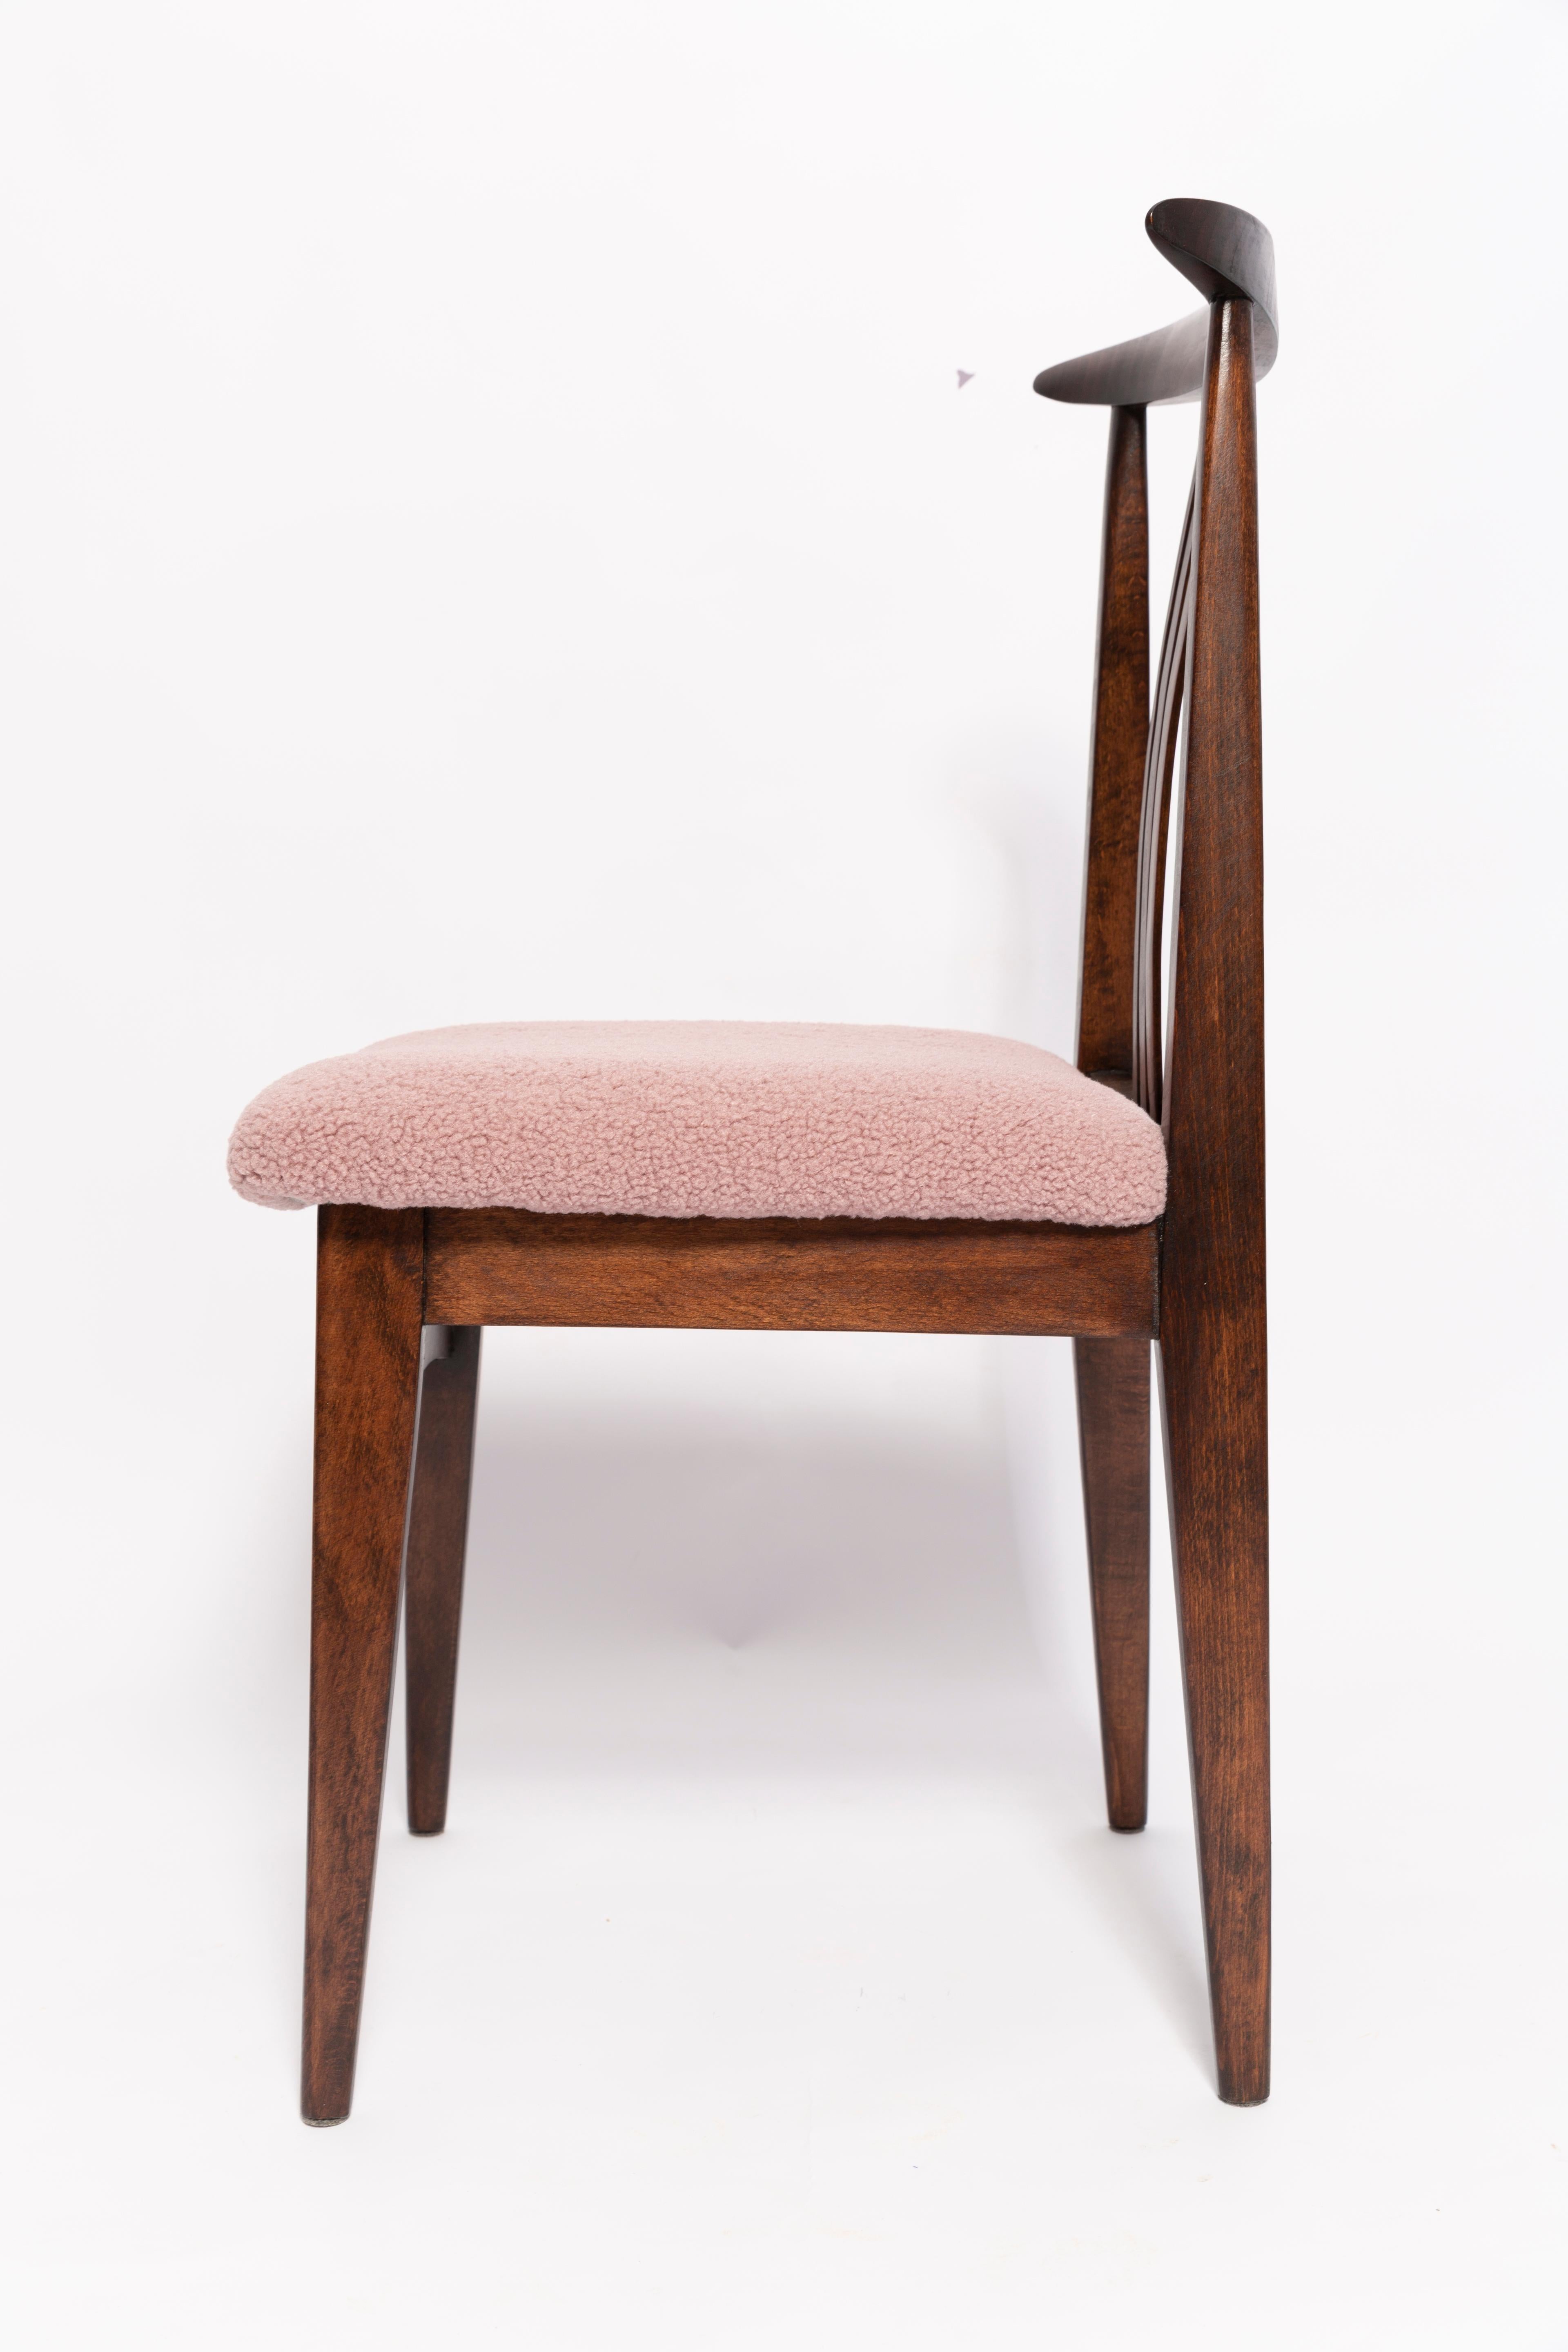 Mid-Century Pink Blush Boucle Chair, Walnut Wood, by M. Zielinski, Europe, 1960s For Sale 1